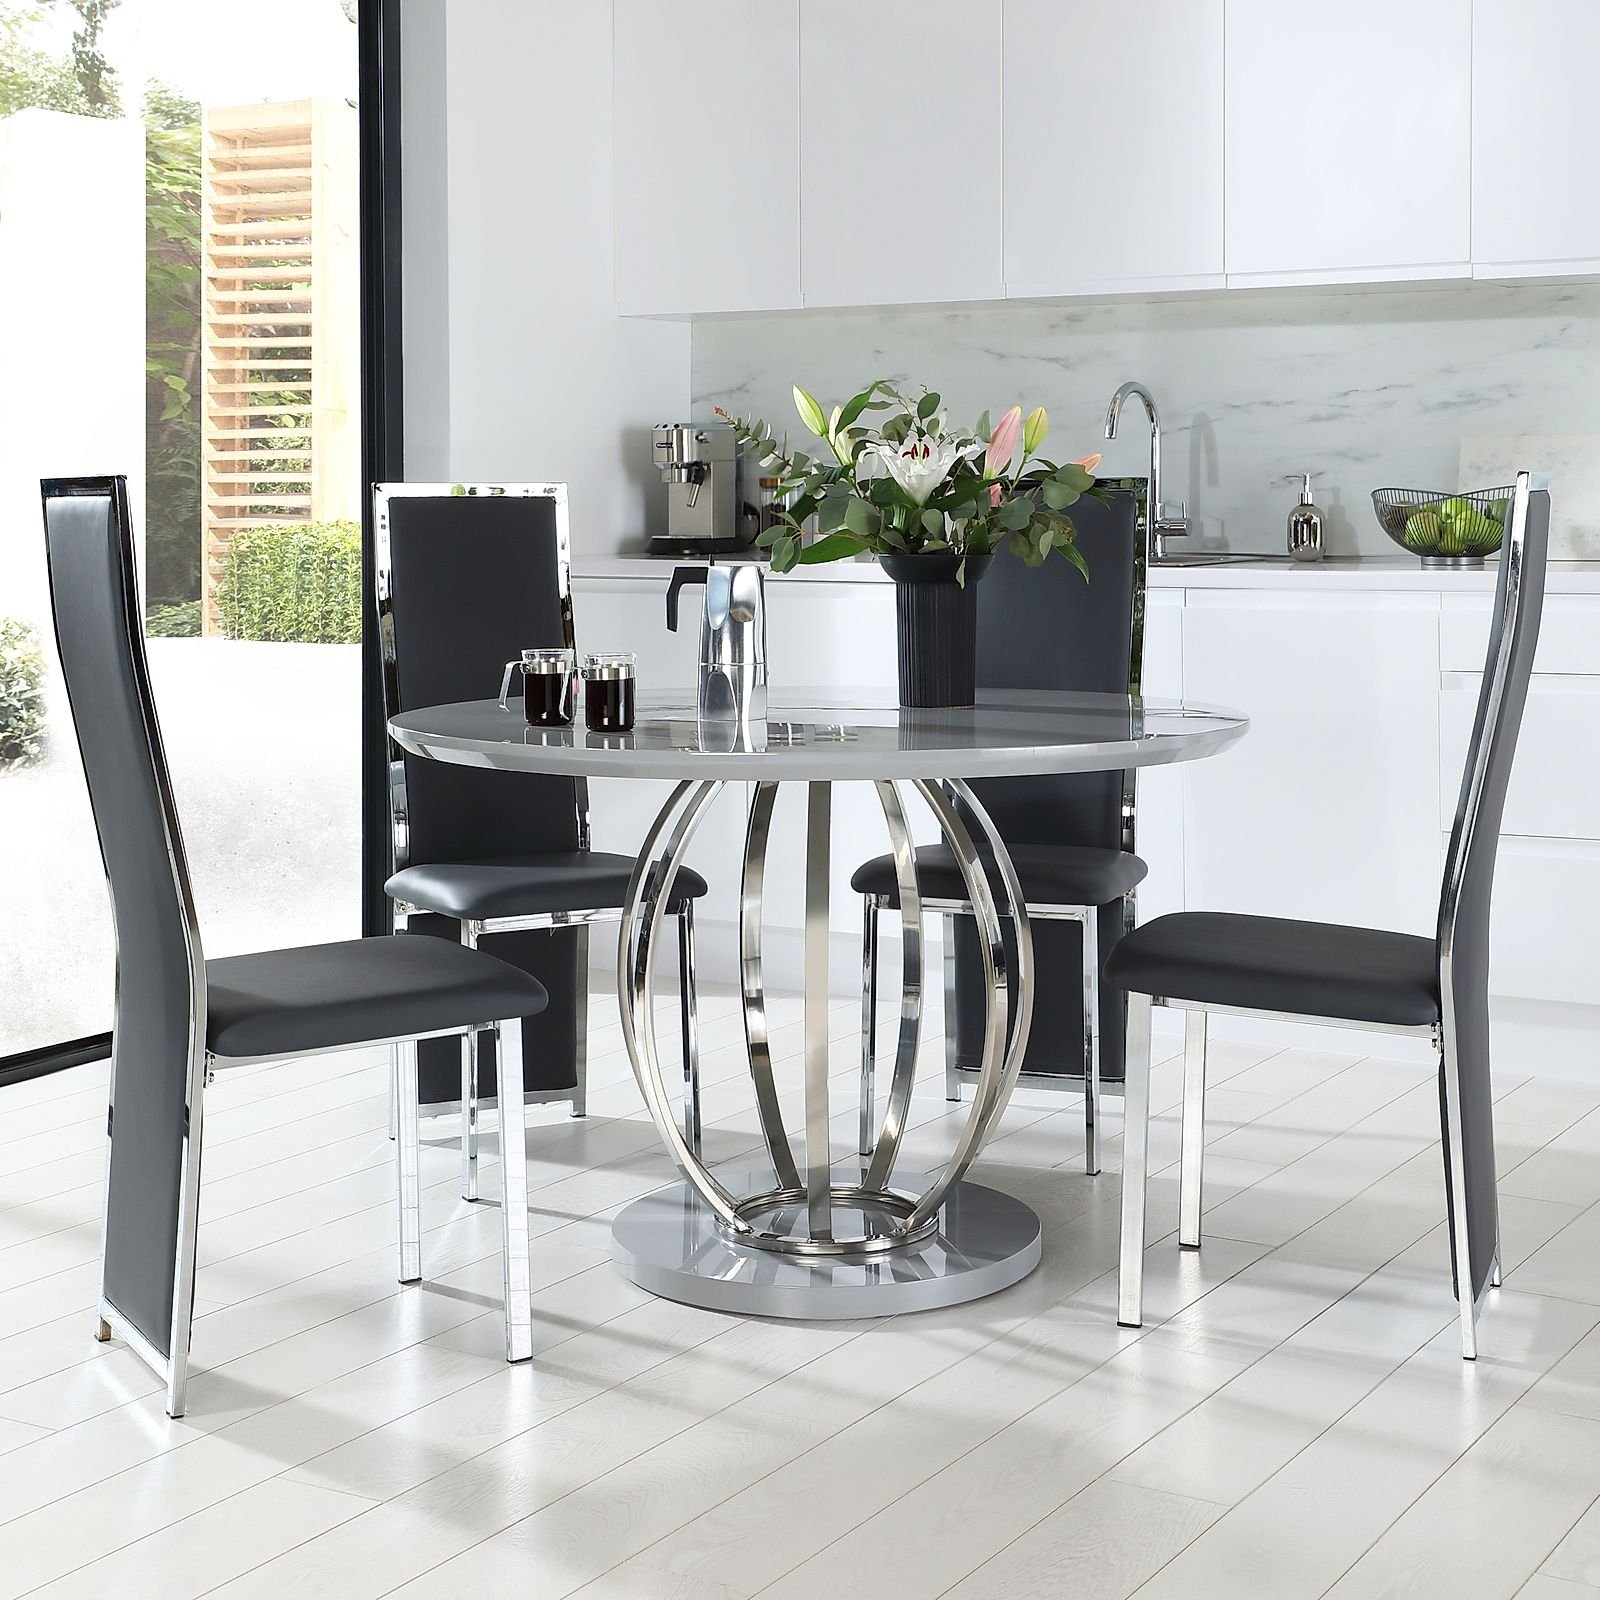 Savoy Round Grey High Gloss and Chrome Dining Table with 4 Celeste Grey Leather Chairs